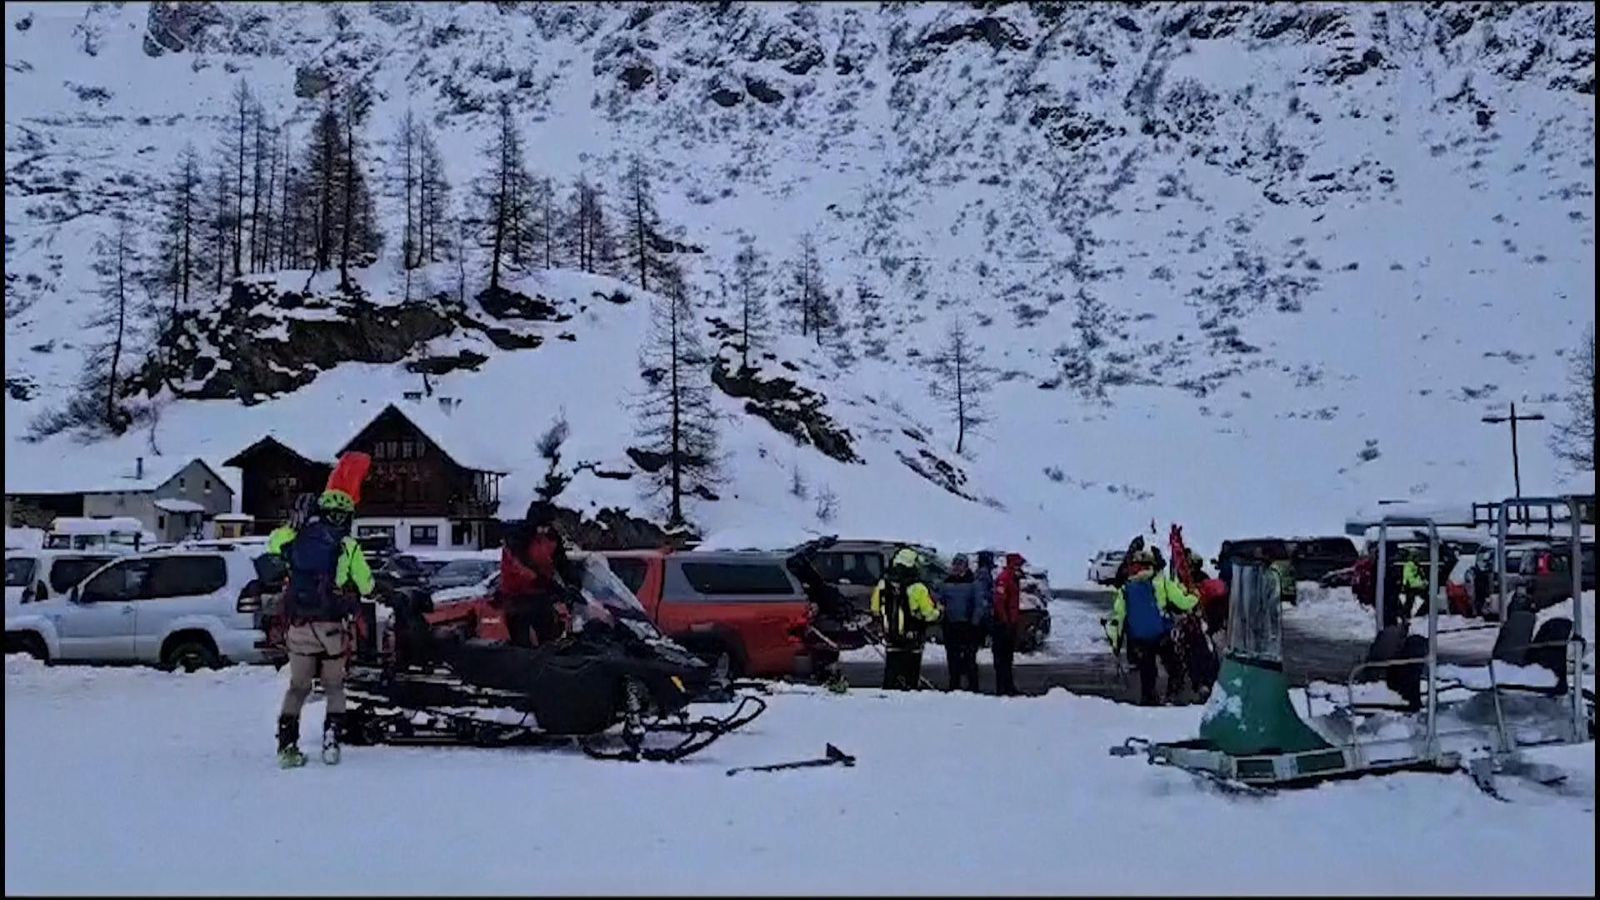 Two hikers killed by an avalanche in the Italian Alps | News UK Video ...